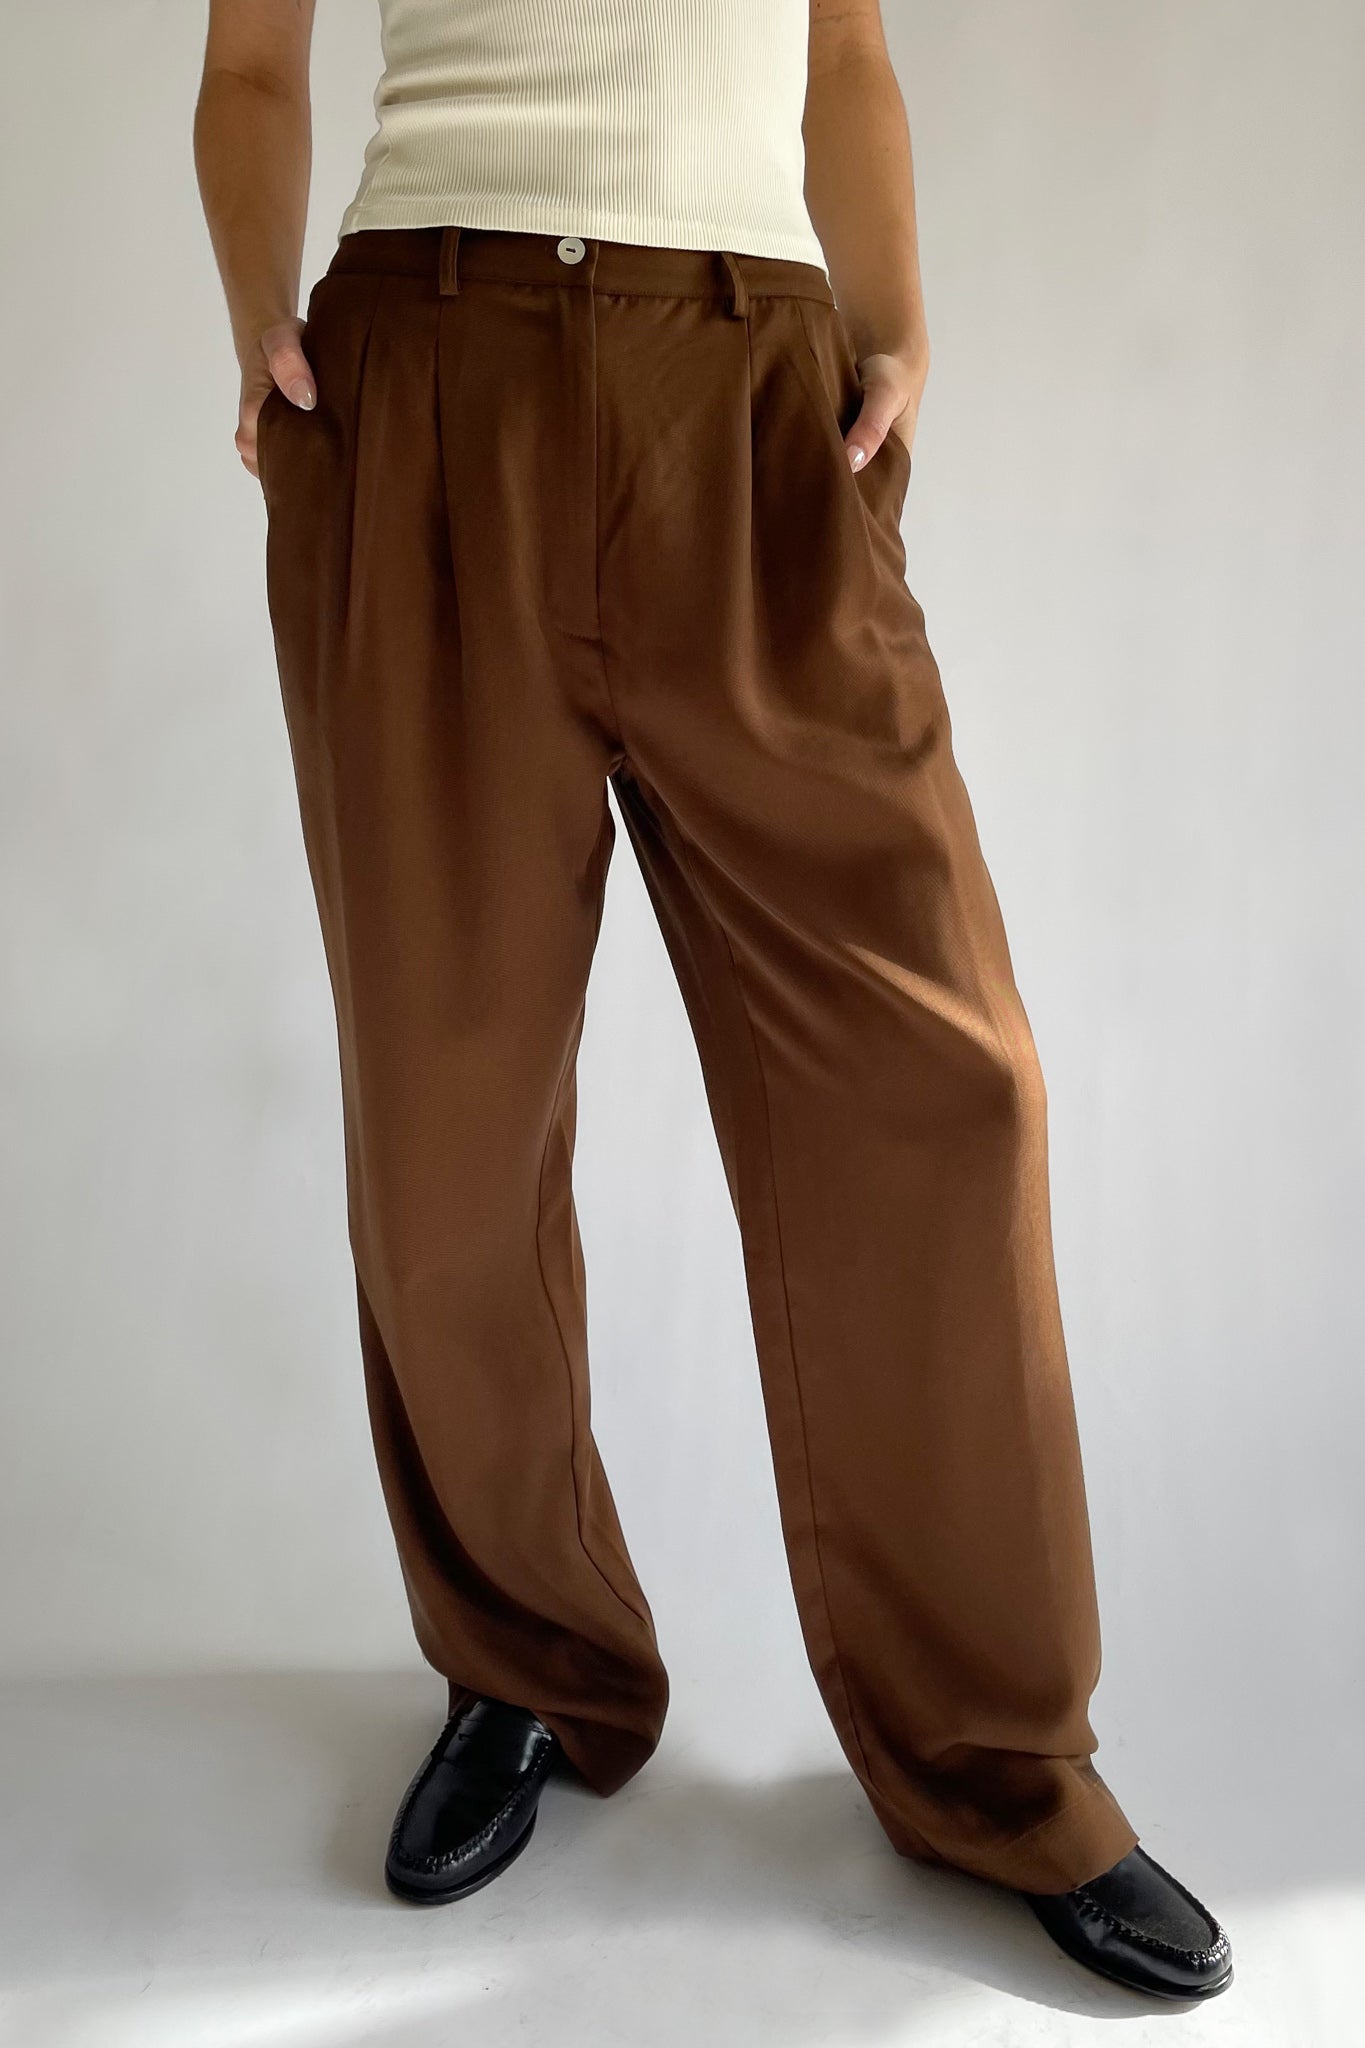 RYRJJ Women's Palazzo Wide Leg Pants Bow Knot Front High Waist Side Slit  Flowy Pleated Pant Casual Work Dress Trousers with Belt(Brown,S) -  Walmart.com